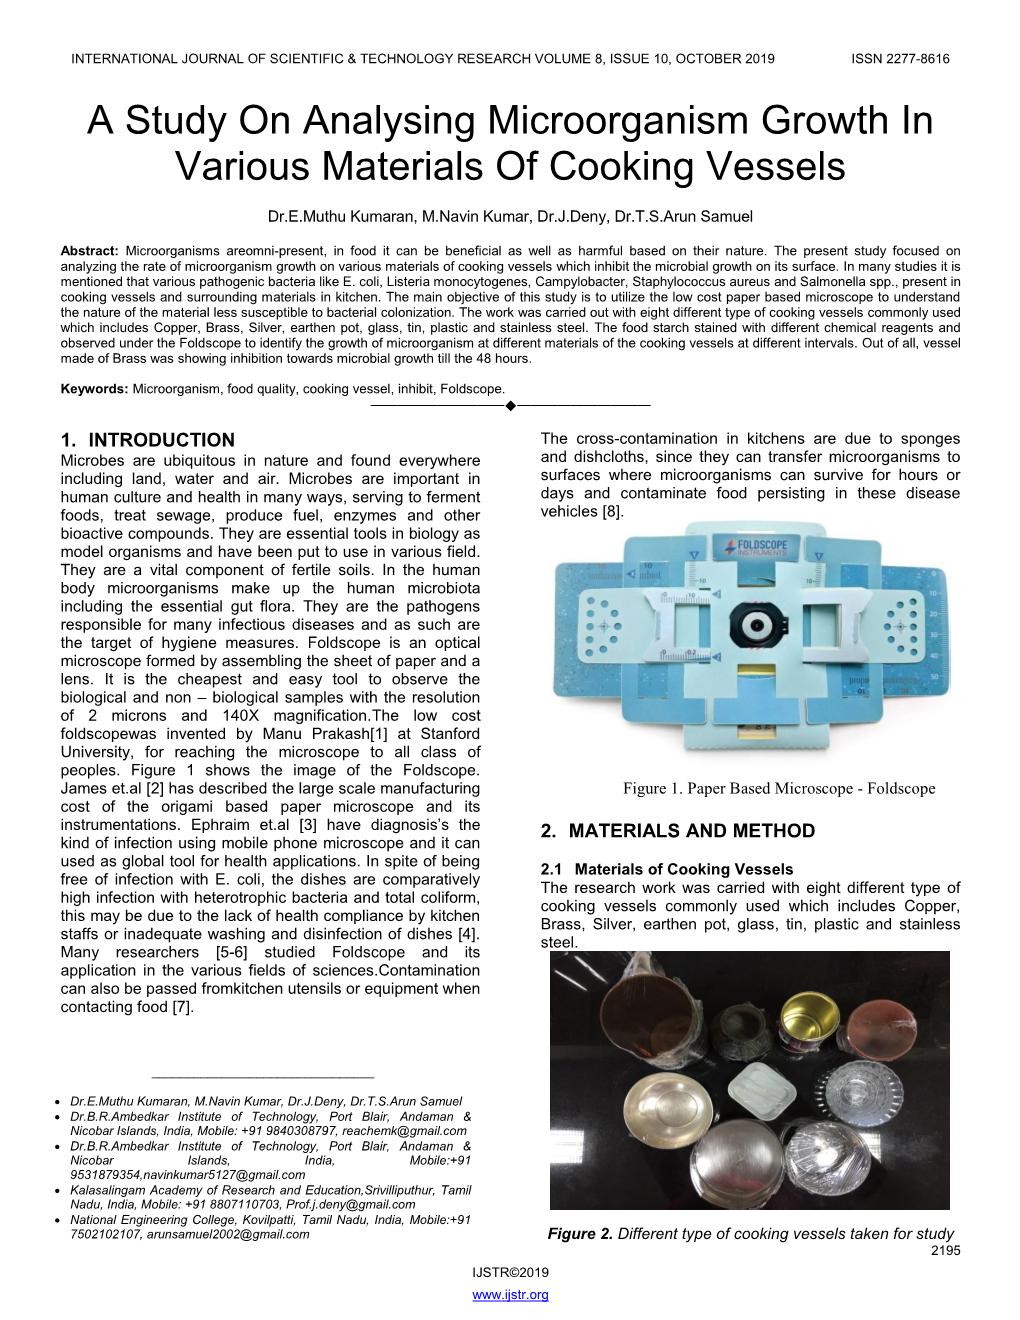 A Study on Analysing Microorganism Growth in Various Materials of Cooking Vessels